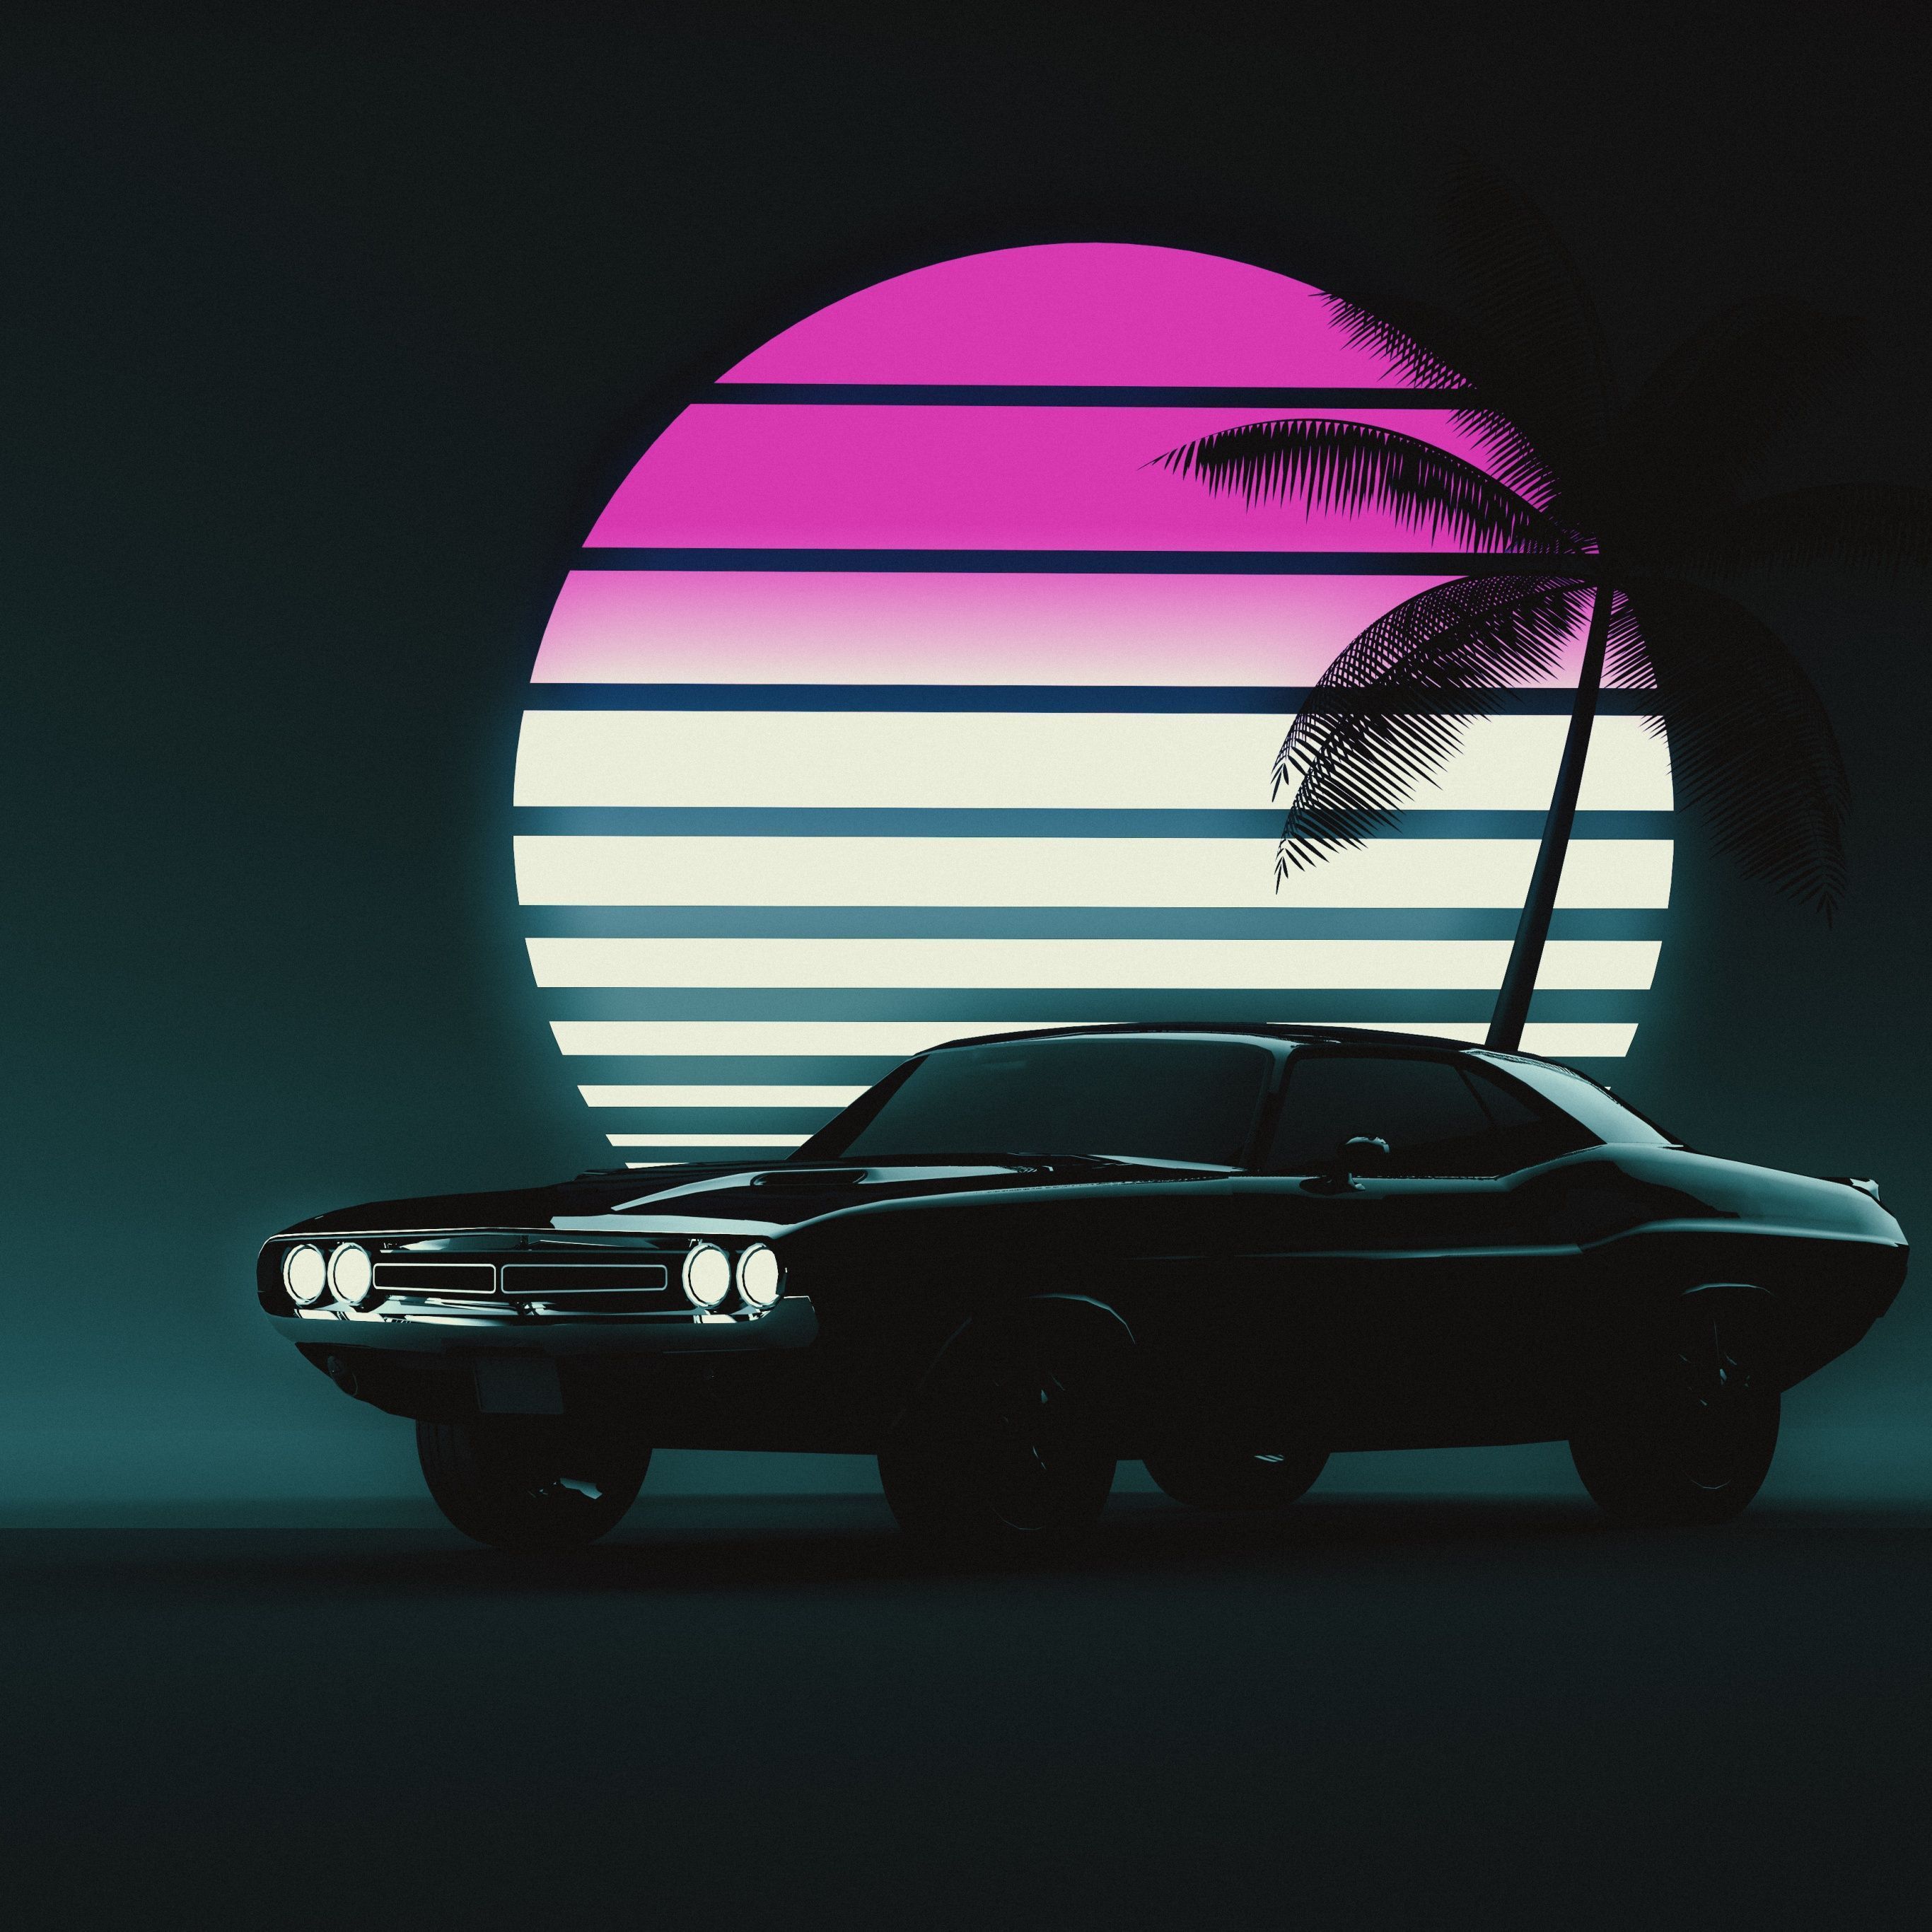 An illustration of a muscle car in front of a sunset - Cars